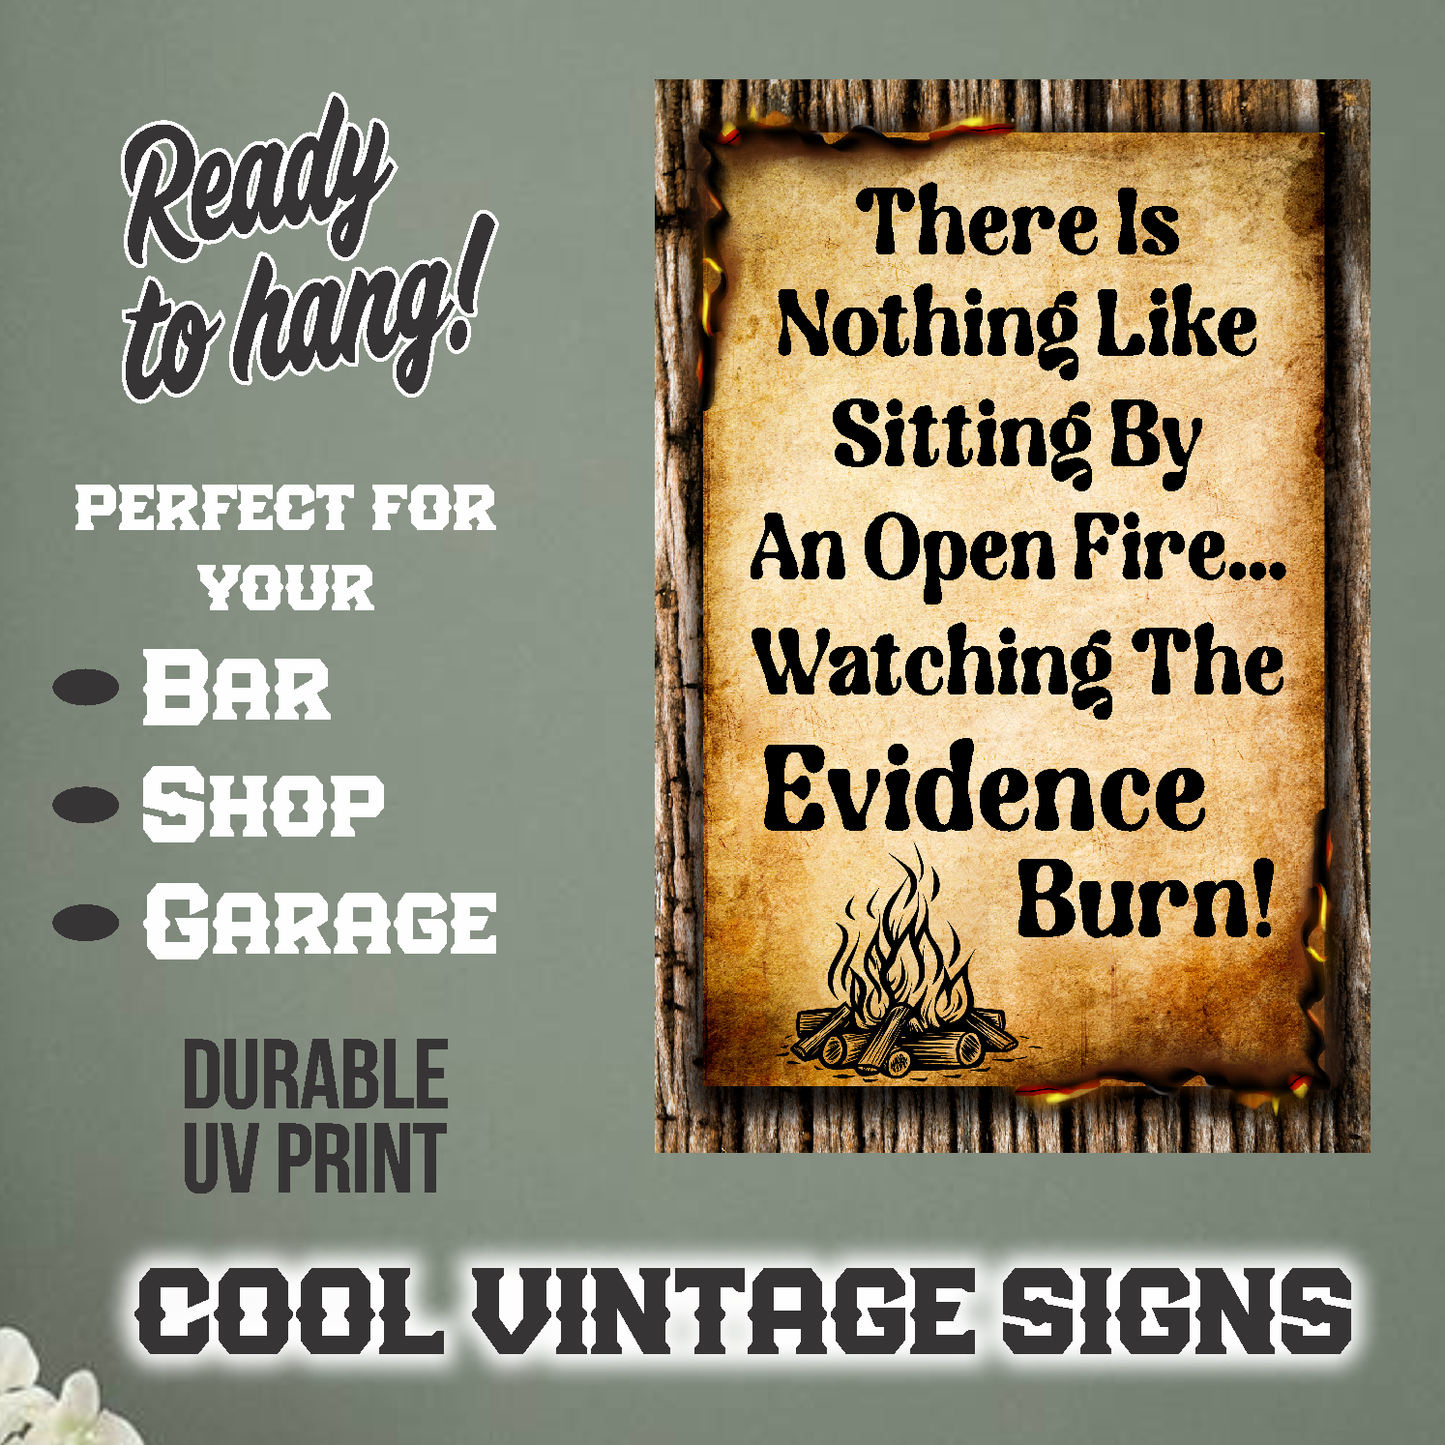 There Is Nothing Like Sitting By An Open Fire... Watching The Evidence Burn - 12" x 18" Vintage Metal Sign